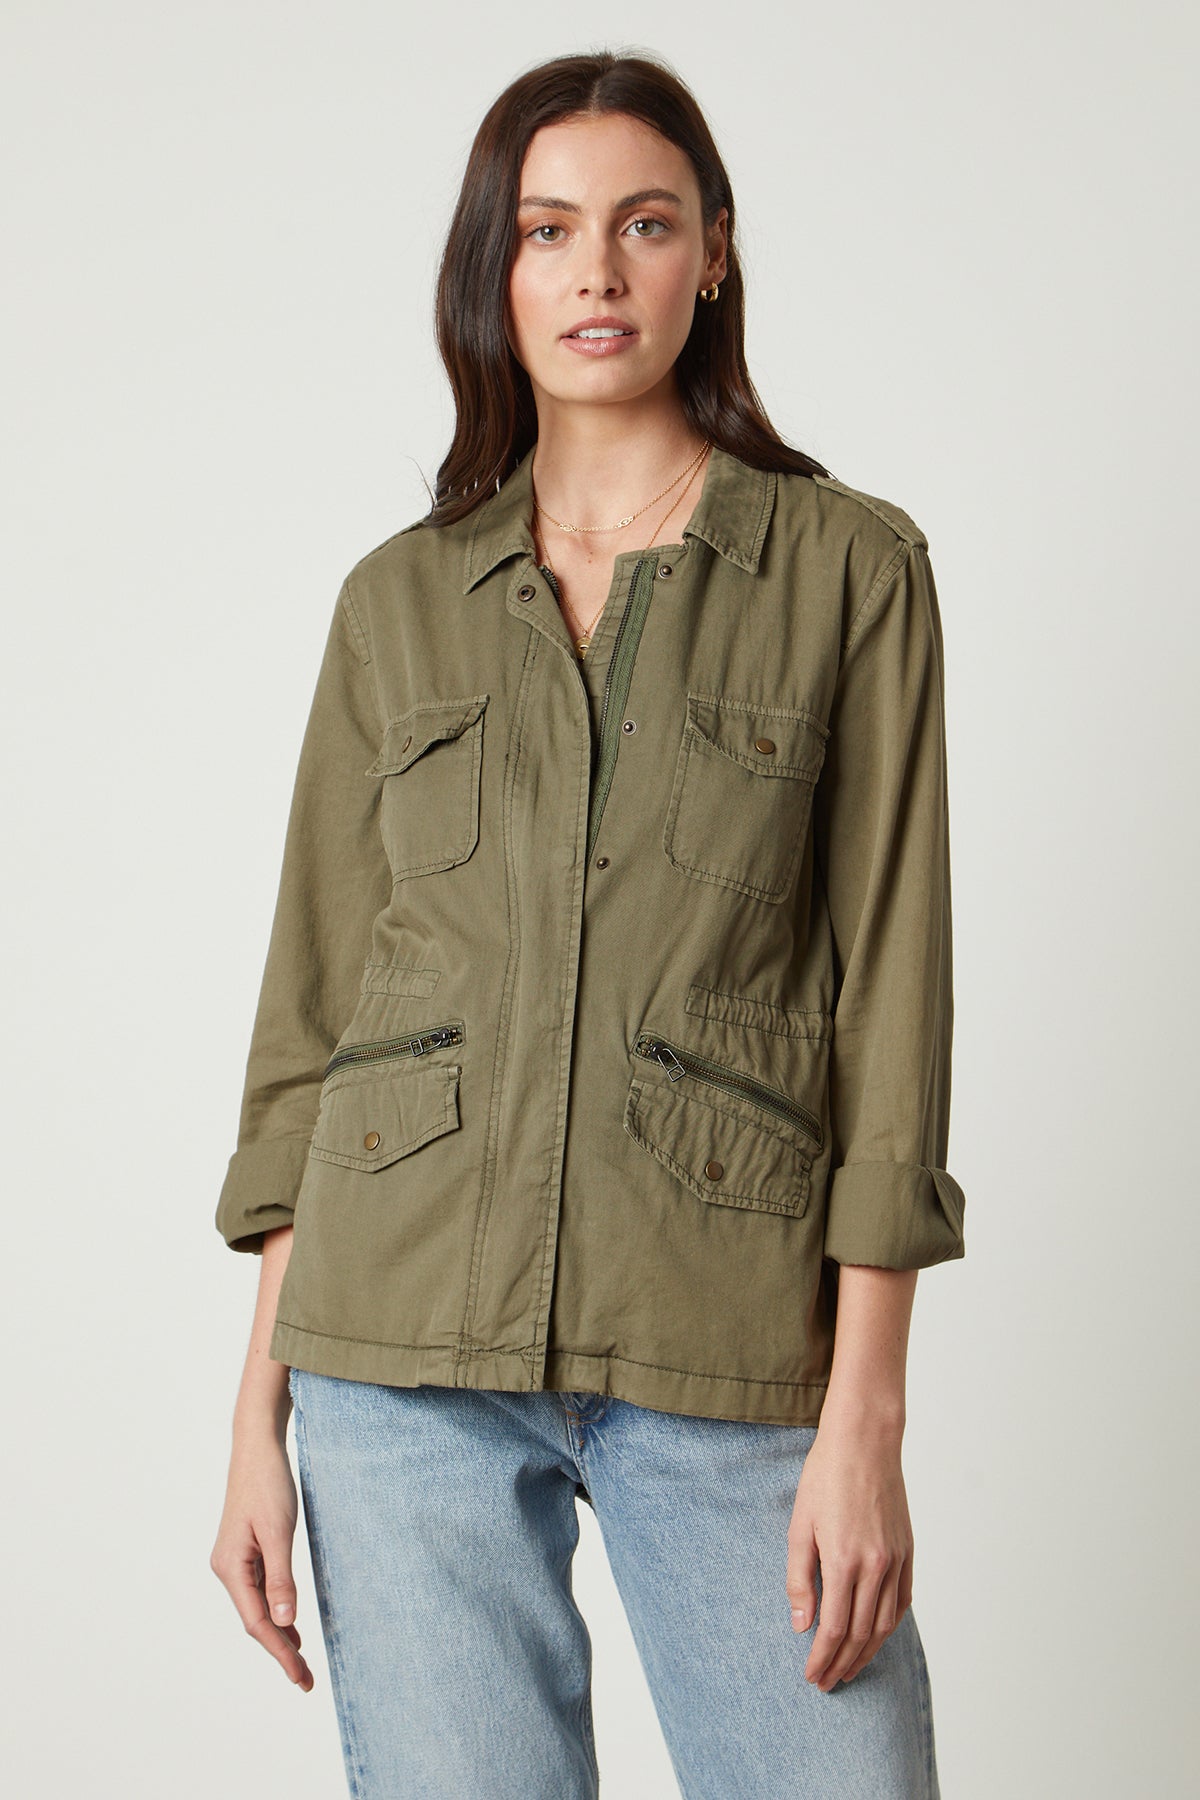   The RUBY LIGHT-WEIGHT ARMY JACKET in olive green, by Velvet by Graham & Spencer, exudes rock and roll glamour. 